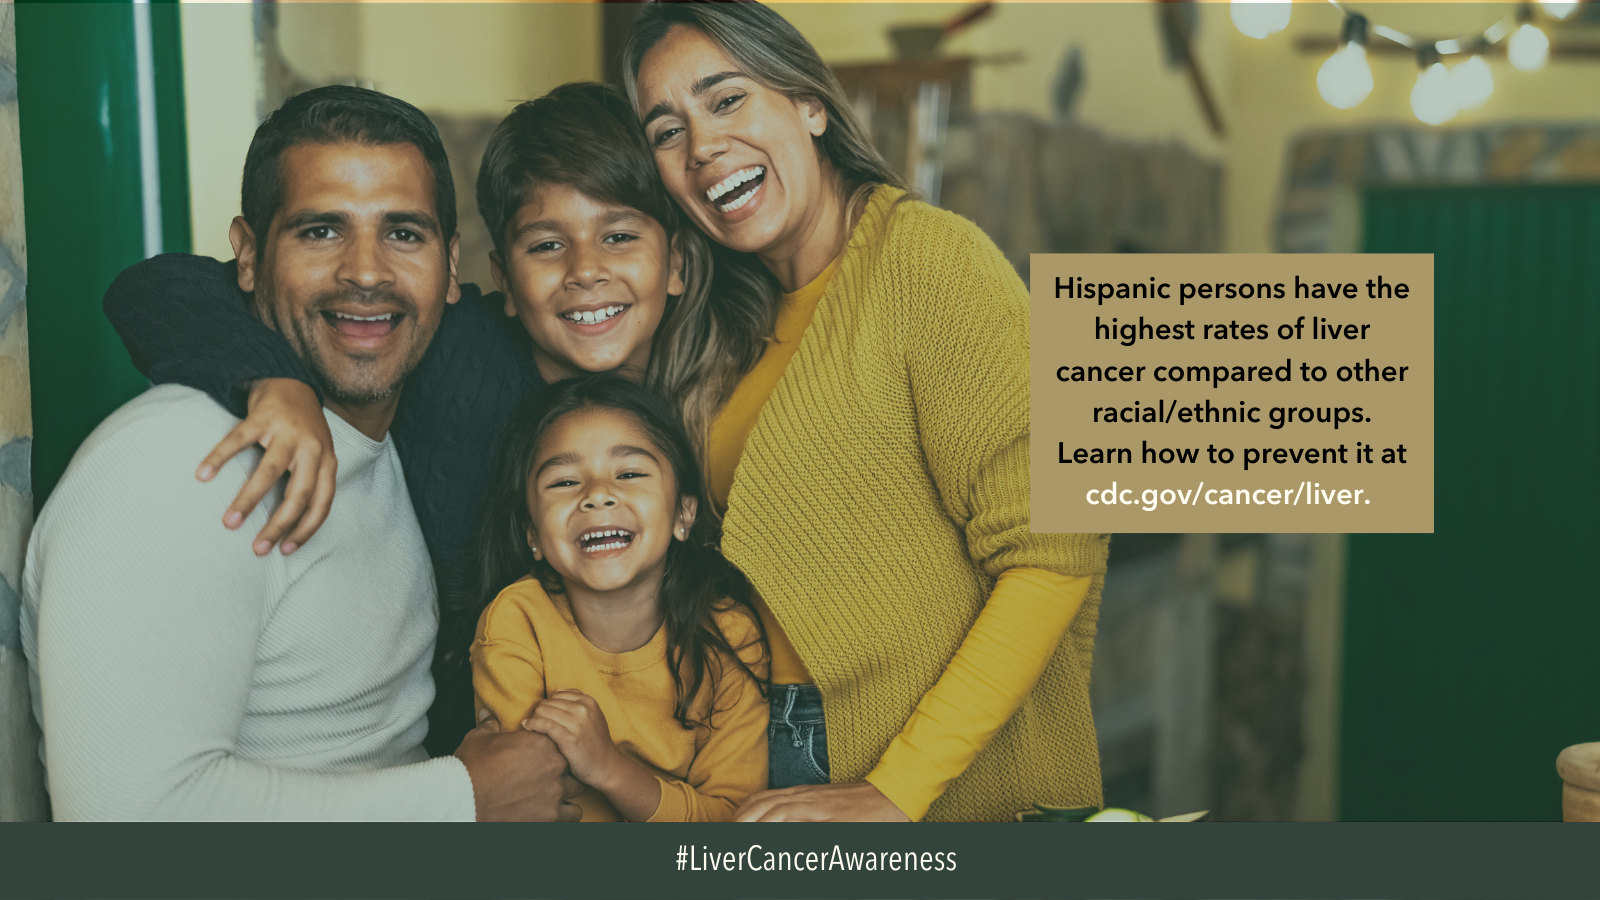 Image of Hispanic family with young kids smiling. Text reads: Hispanic persons have the highest rates of liver cancer compared to other racial/ethnic groups. Learn how to prevent it at cdc.gov/cancer/liver